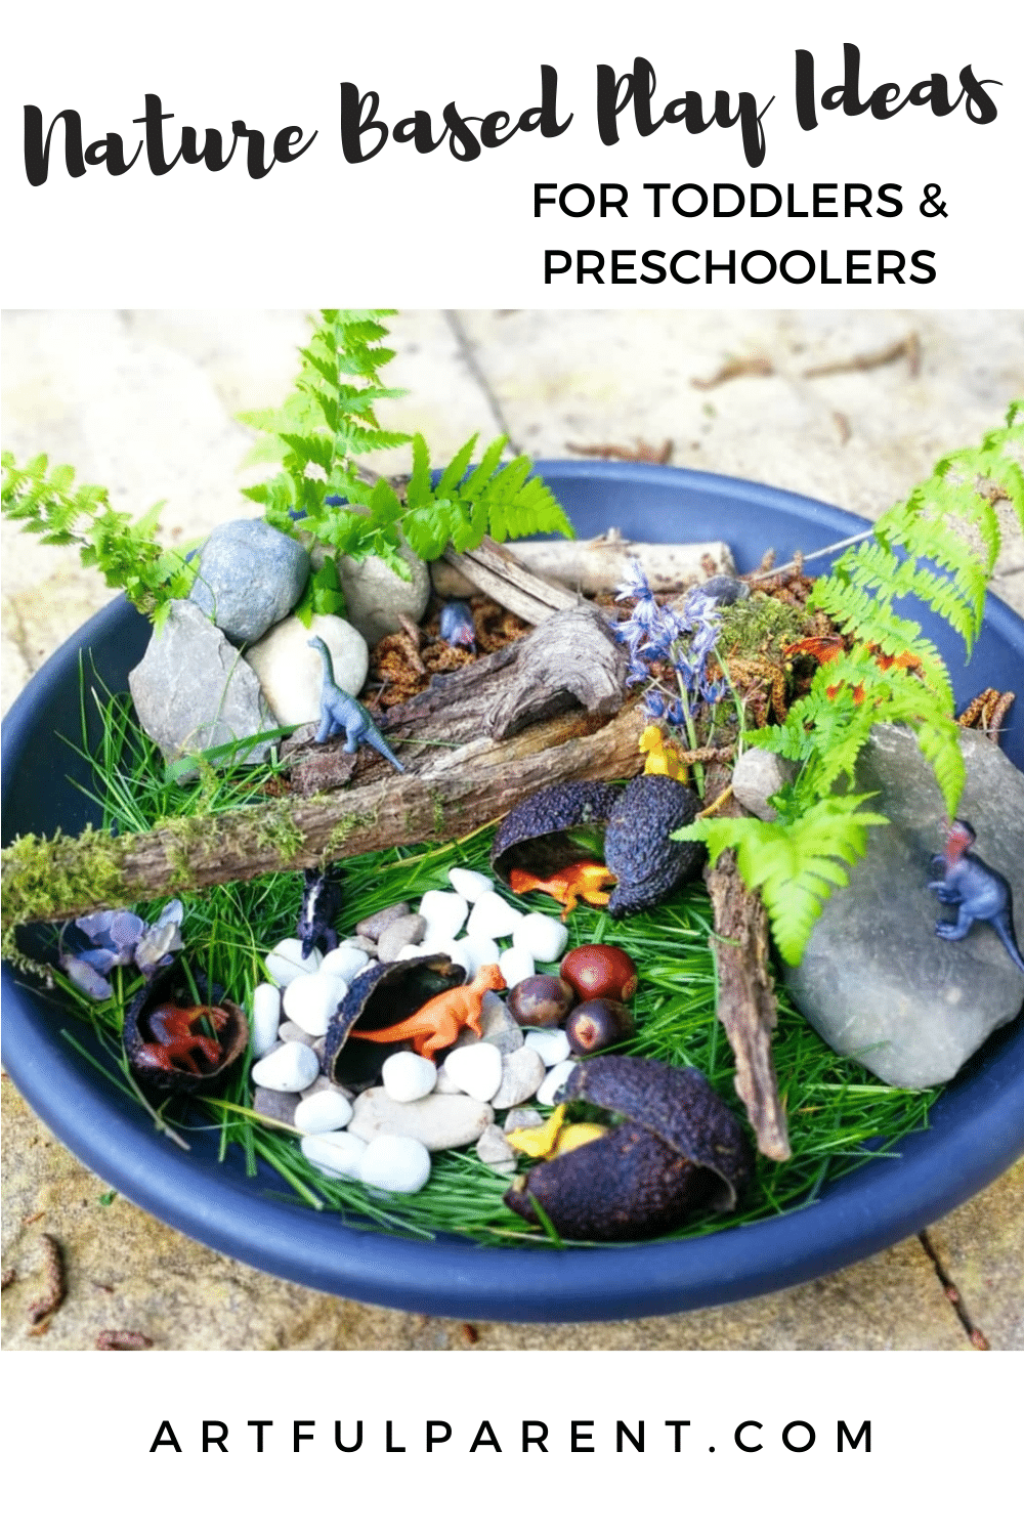 Picture of: Nature Based Play Ideas for Toddlers & Preschoolers